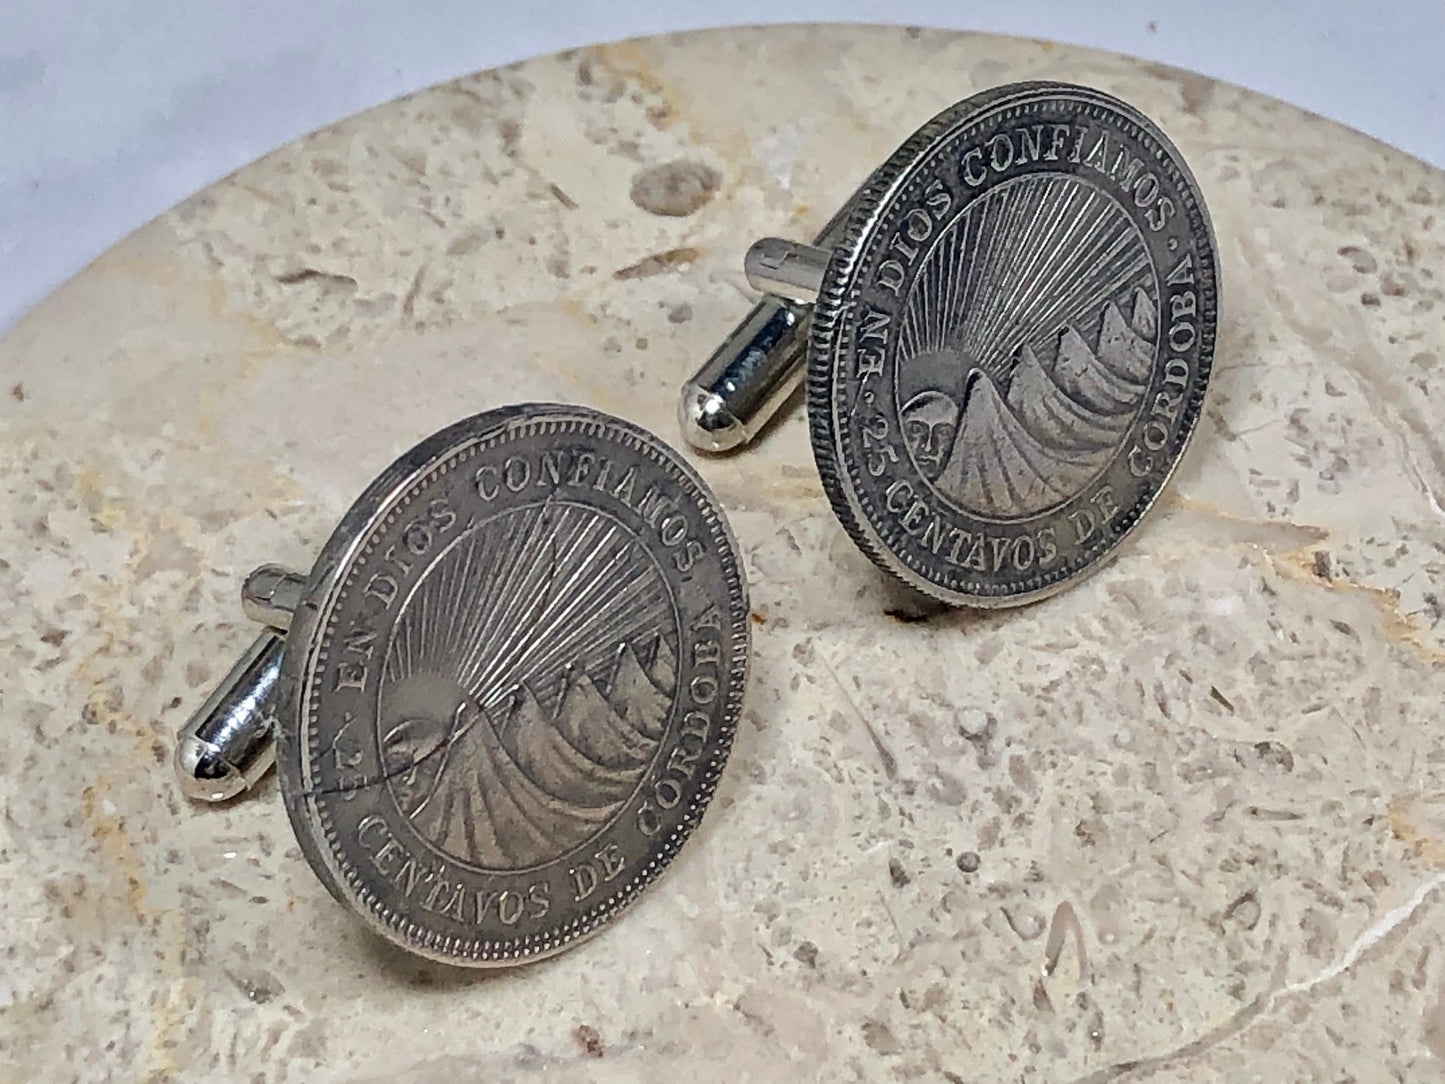 Nicaragua Coin Cuff Links Nicaraguan Centavos Custom Personal Vintage Handmade Jewelry Gift Friend Charm For Him Her World Coin Collector